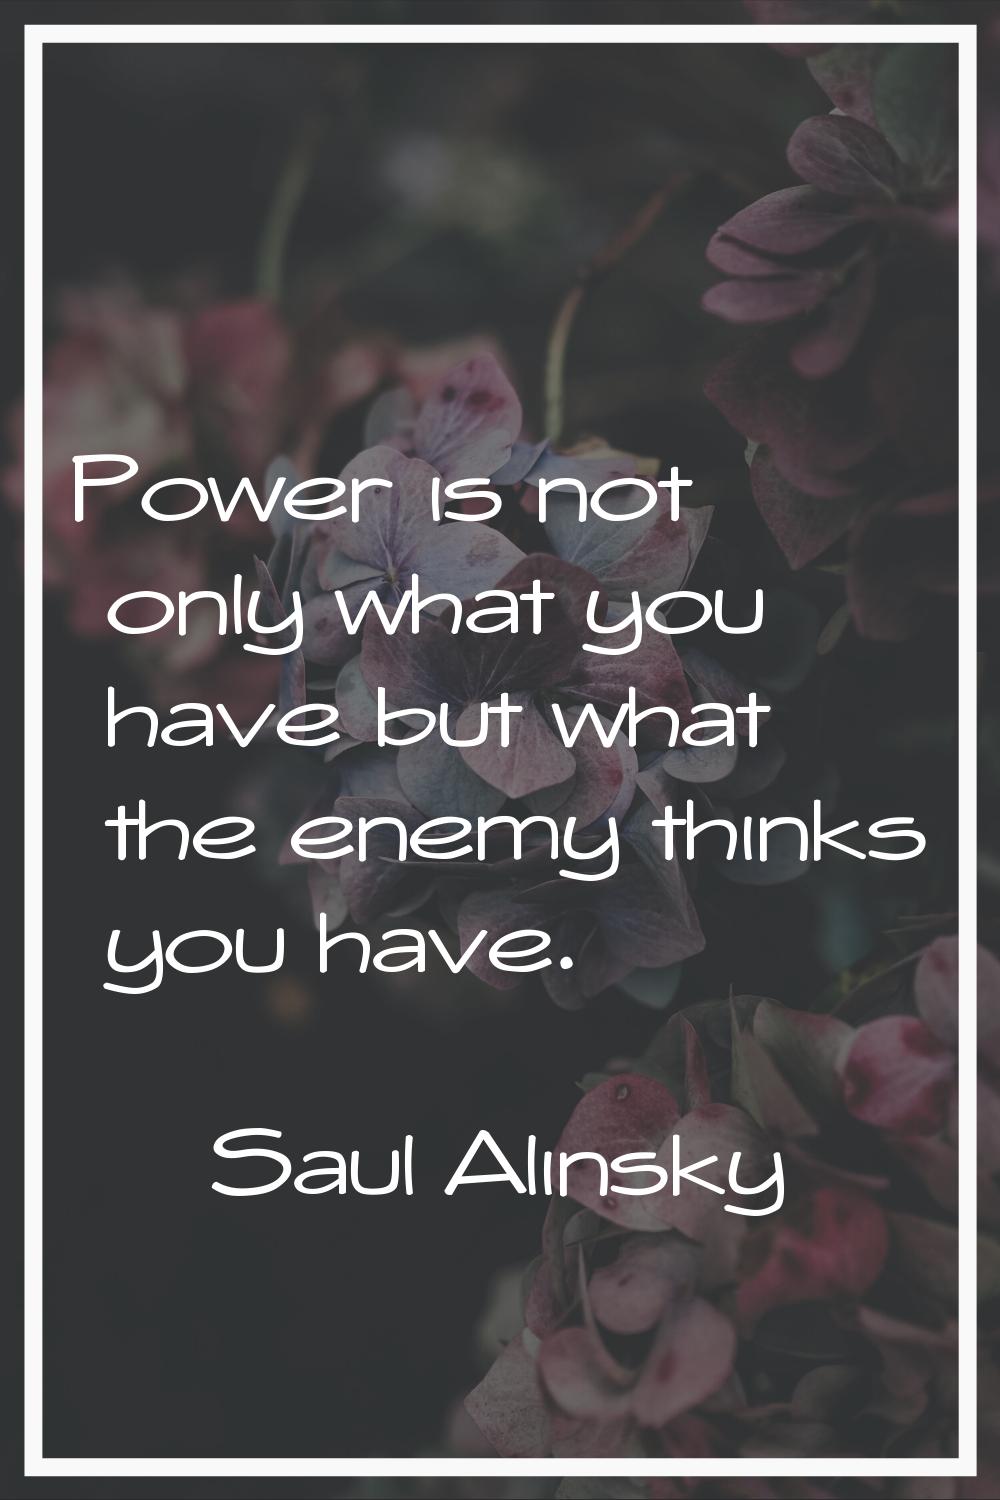 Power is not only what you have but what the enemy thinks you have.